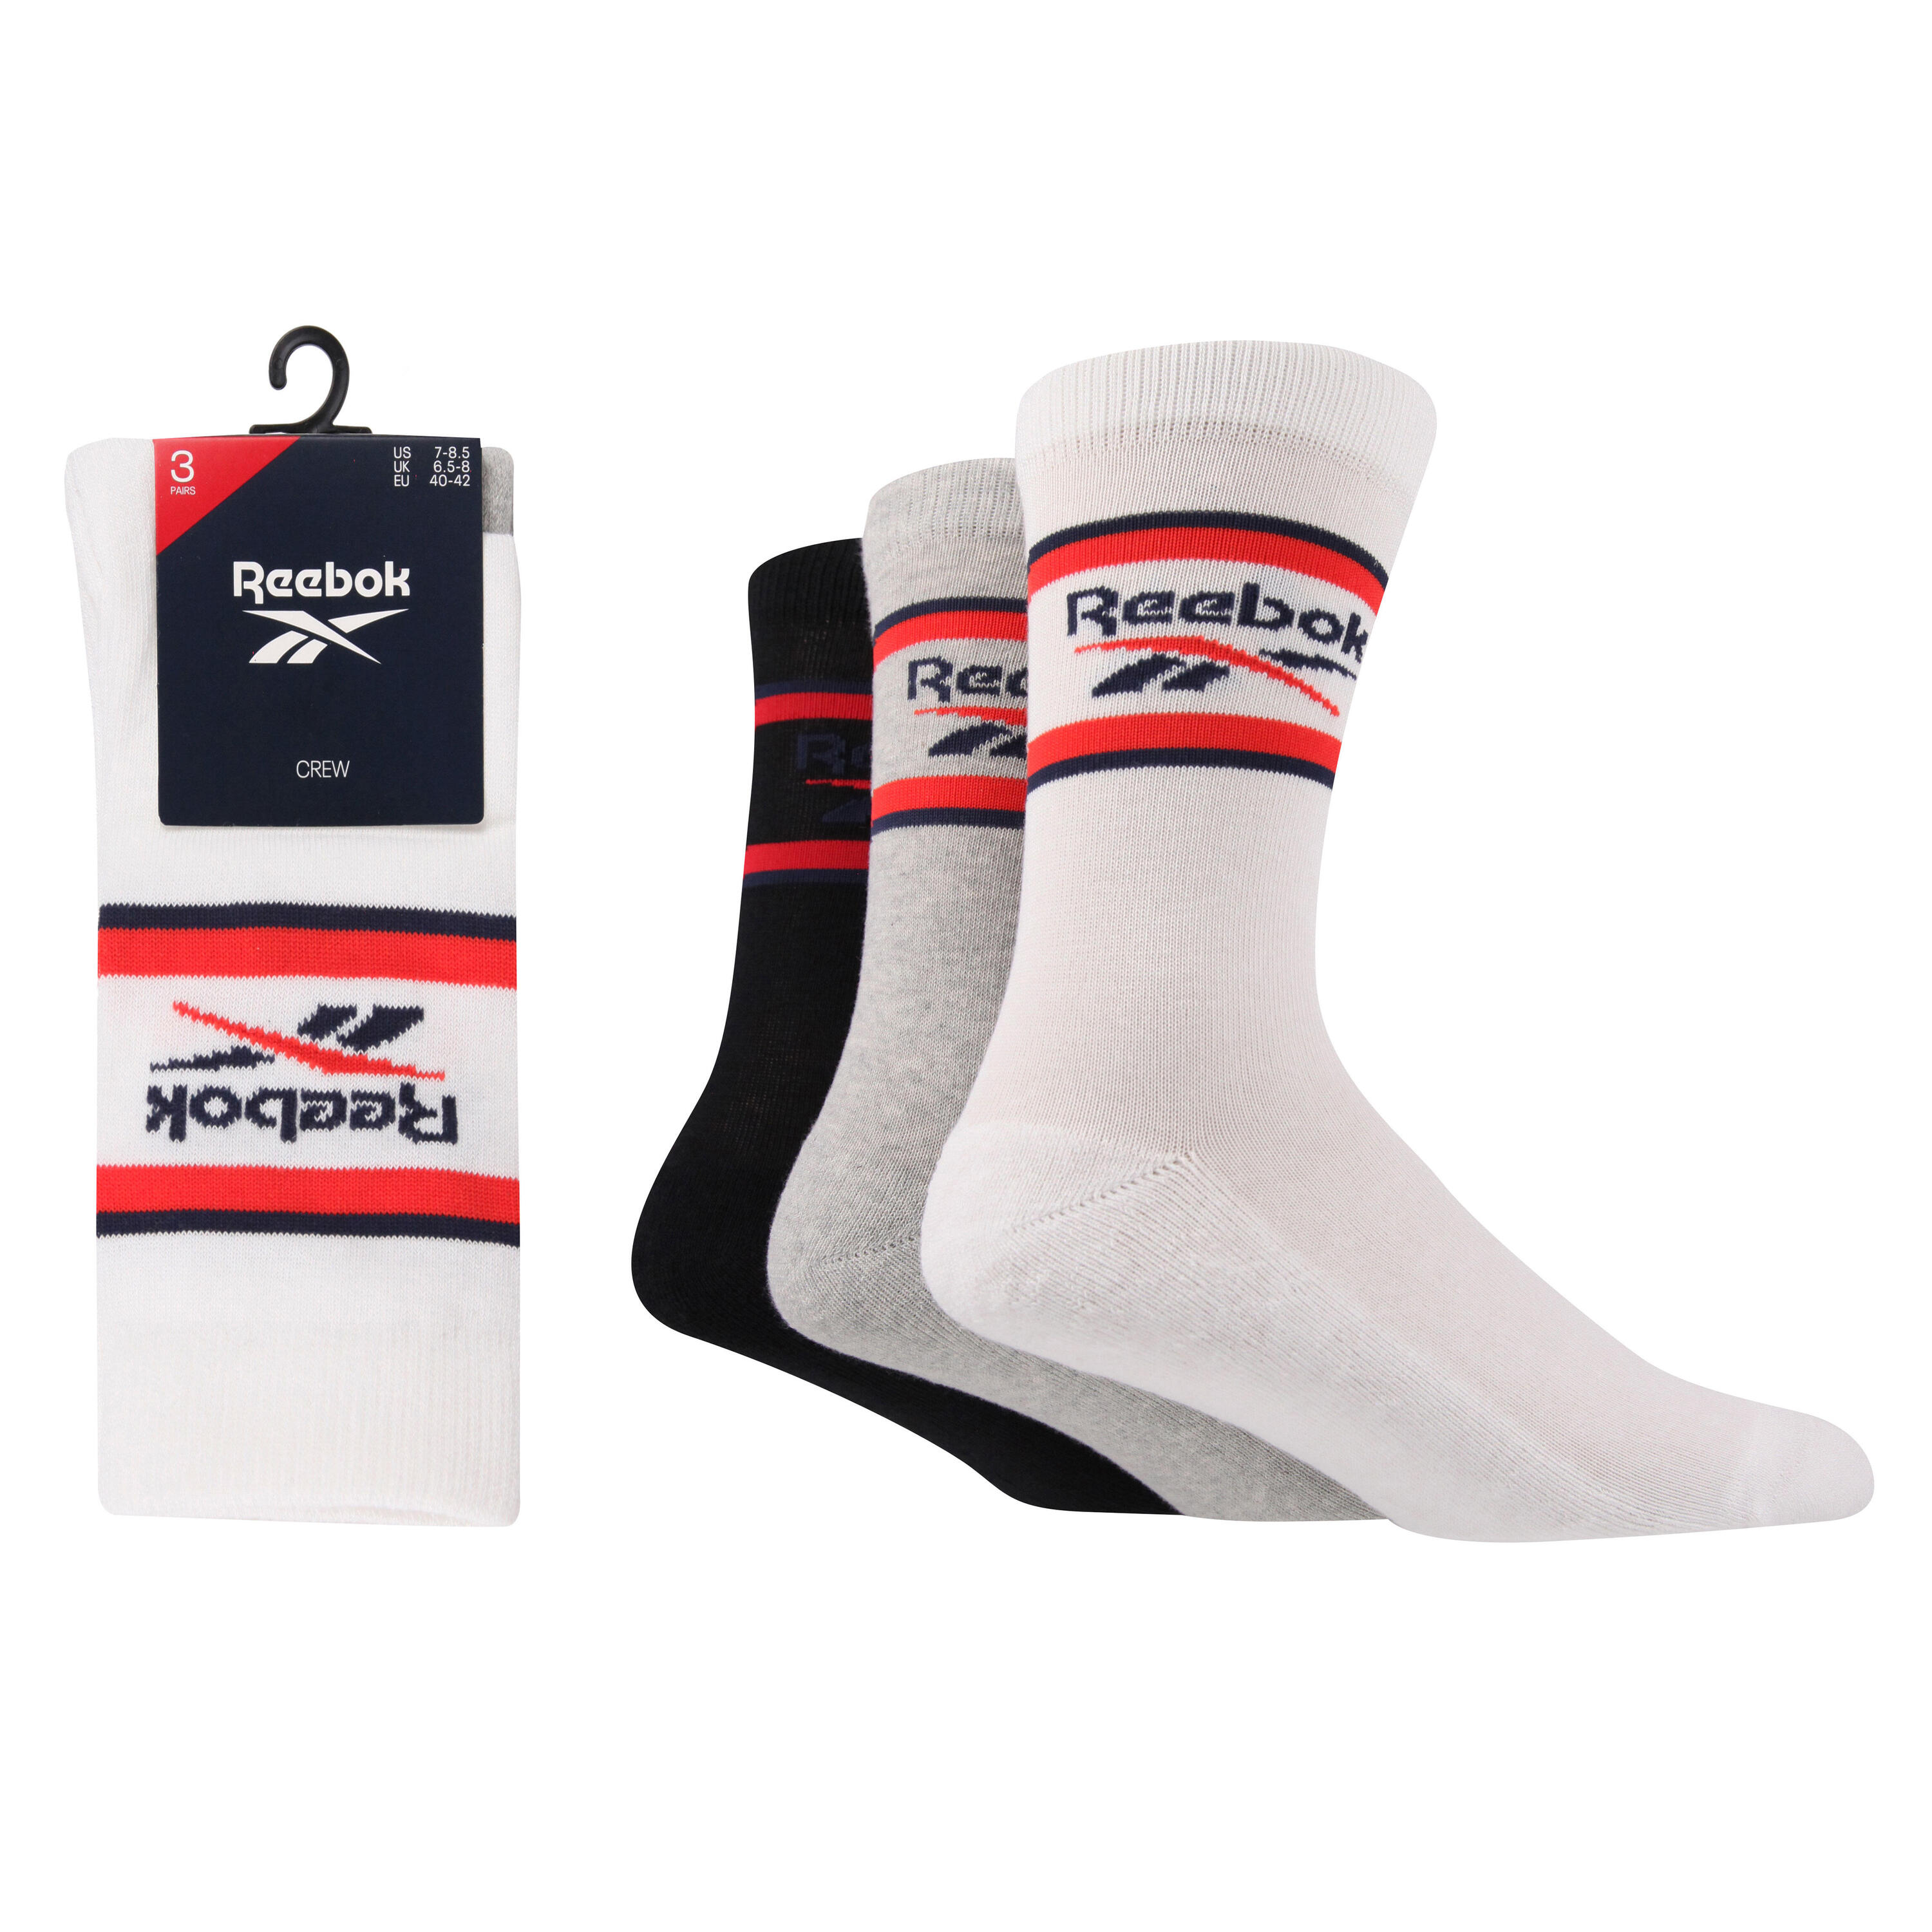 REEBOK 3 Pack Crew Ankle Sport Socks With Cushioned Sole, Plain Knit And Seamless Toes